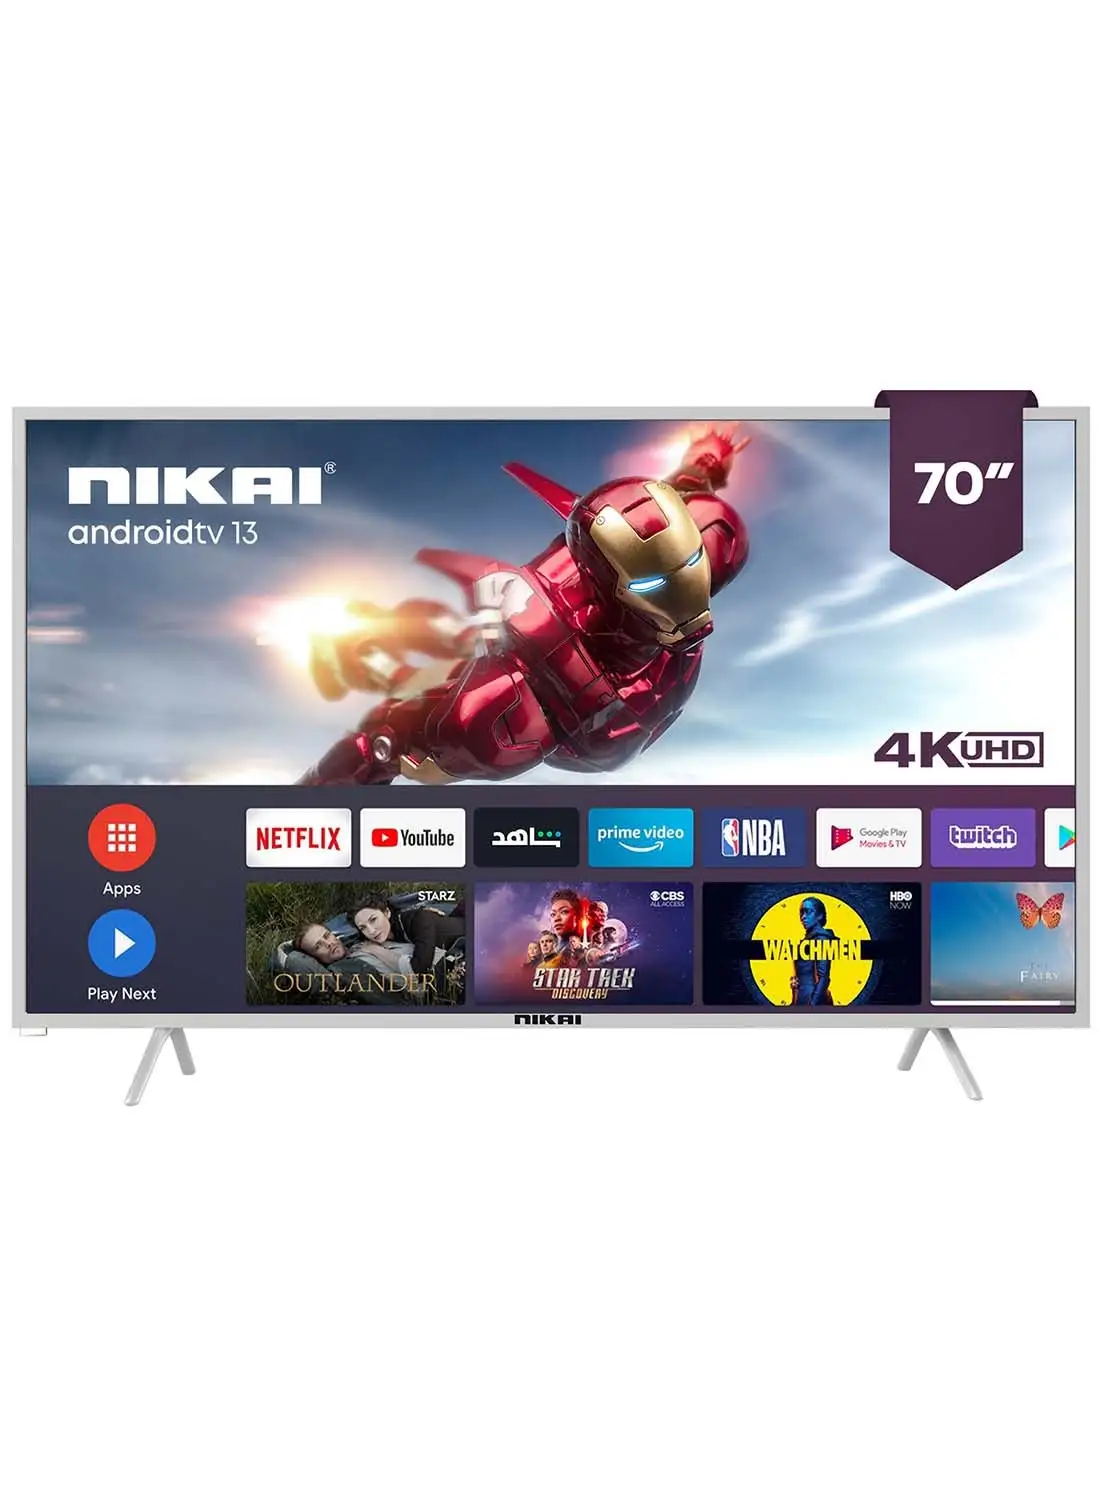 NIKAI 70 Inch Smart LED TV, Frameless Design, Built-In Wi-Fi, Smart Apps Shahid, YouTube, Netflix, Amazon, HDMI And USB Connectivity, Quad-Core, 1GB RAM, 8 GB Memory, Auto Power Off UHD70SLED Silver/Black